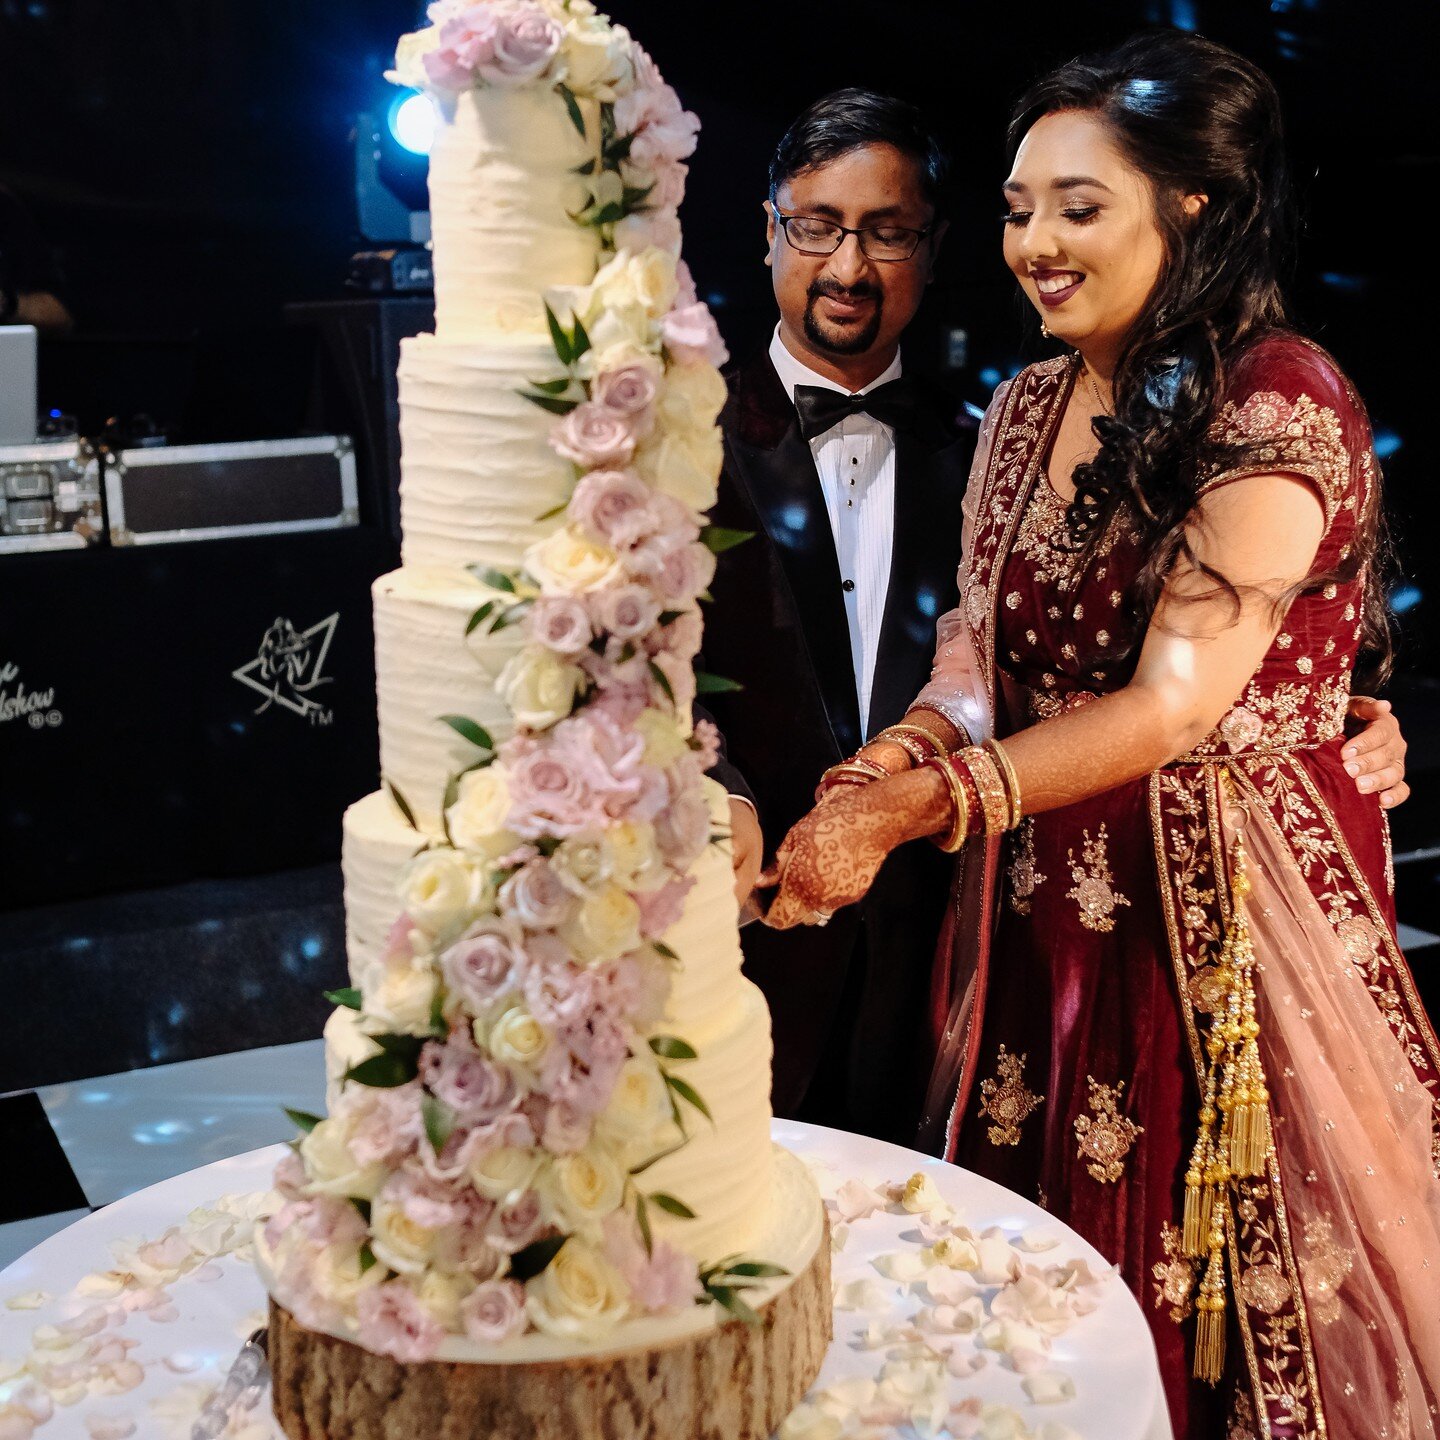 Lets talk wedding cakes.

Today wedding cakes are a key part of many wedding ceremonies and receptions. It serves as a beautiful centrepiece and a reminder of the couple&rsquo;s commitment to each other. Whether you choose a traditional tiered cake o